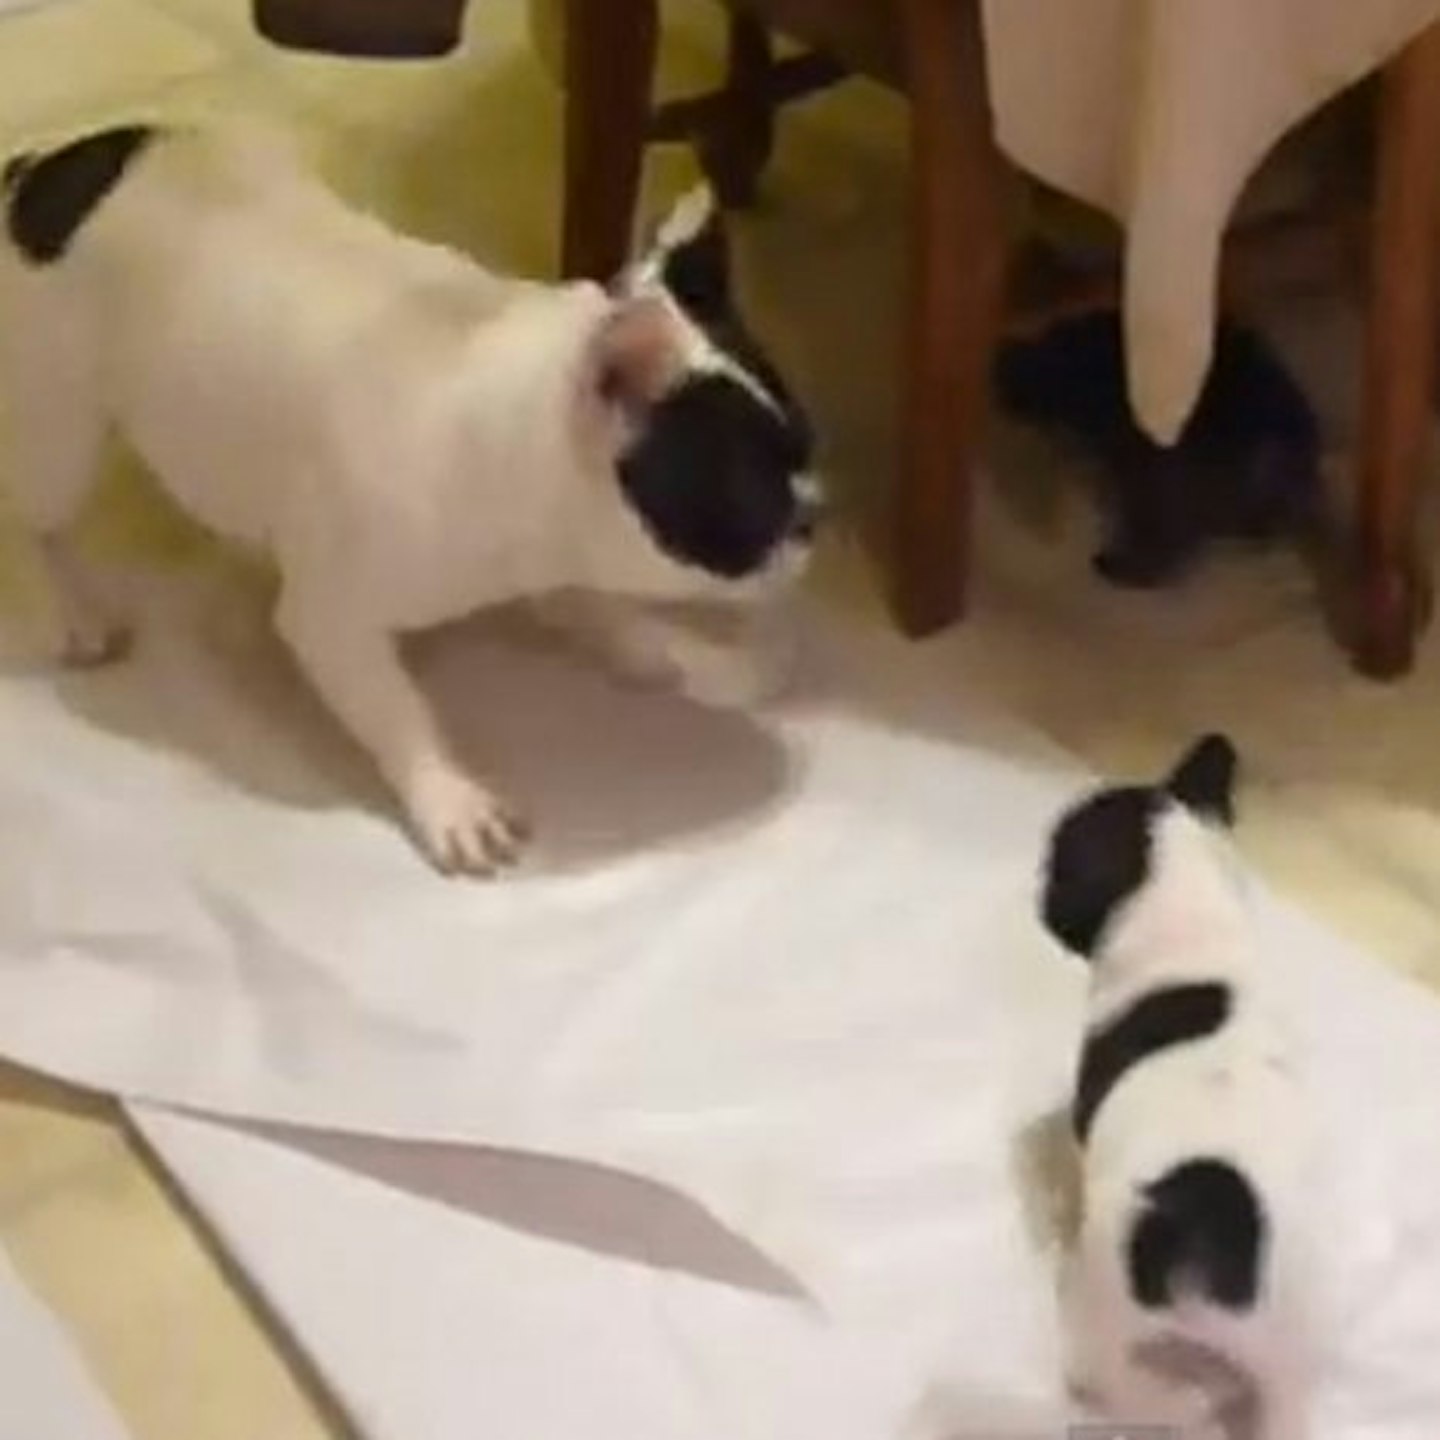 The puppies outsmart dad by going under the table